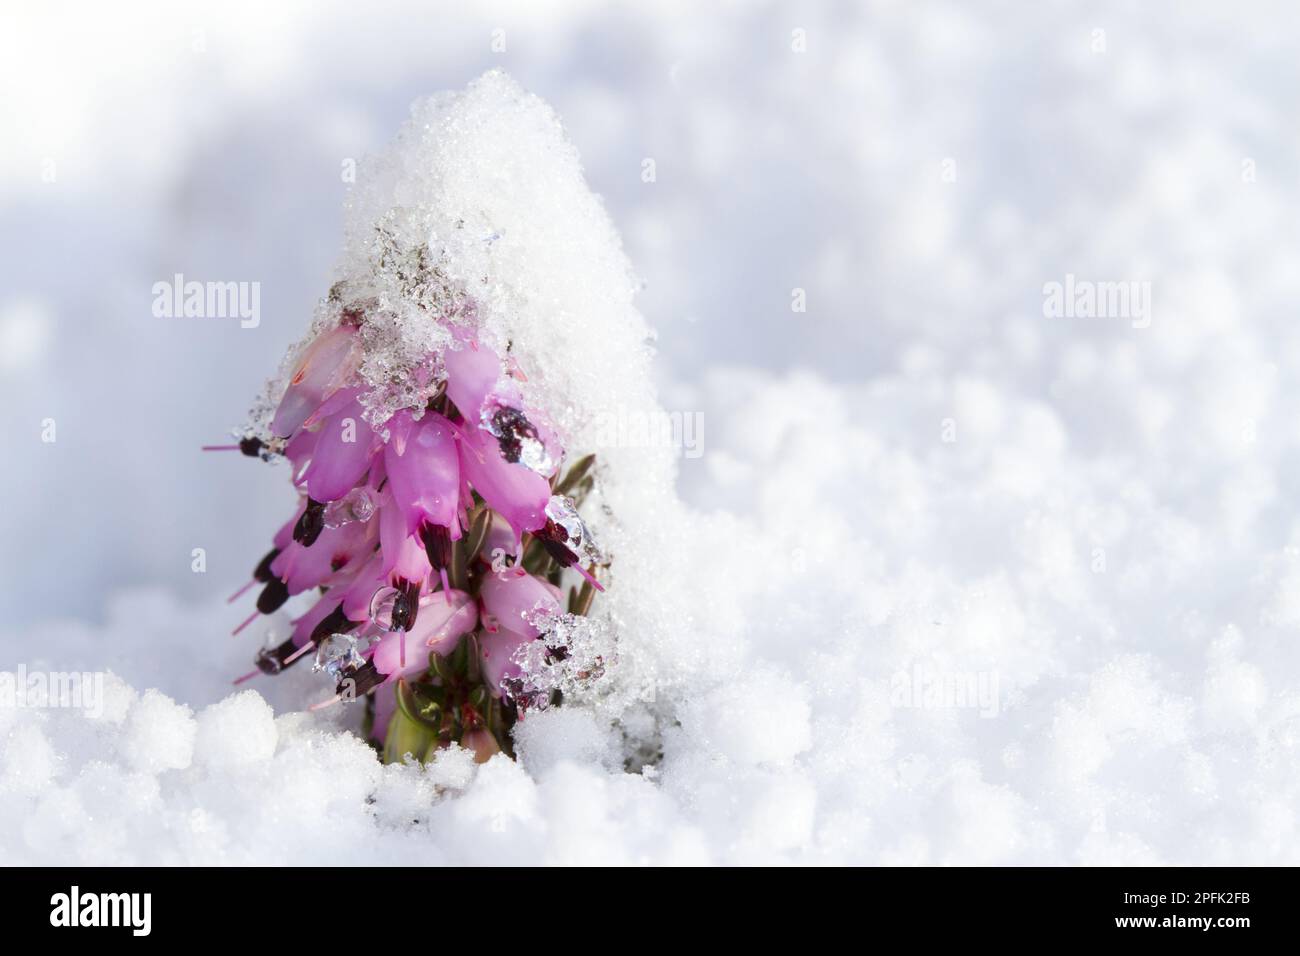 Cultivated winter heather (Erica x darleyensis) flowers, growing through snow in the garden, Powys, Wales, United Kingdom Stock Photo